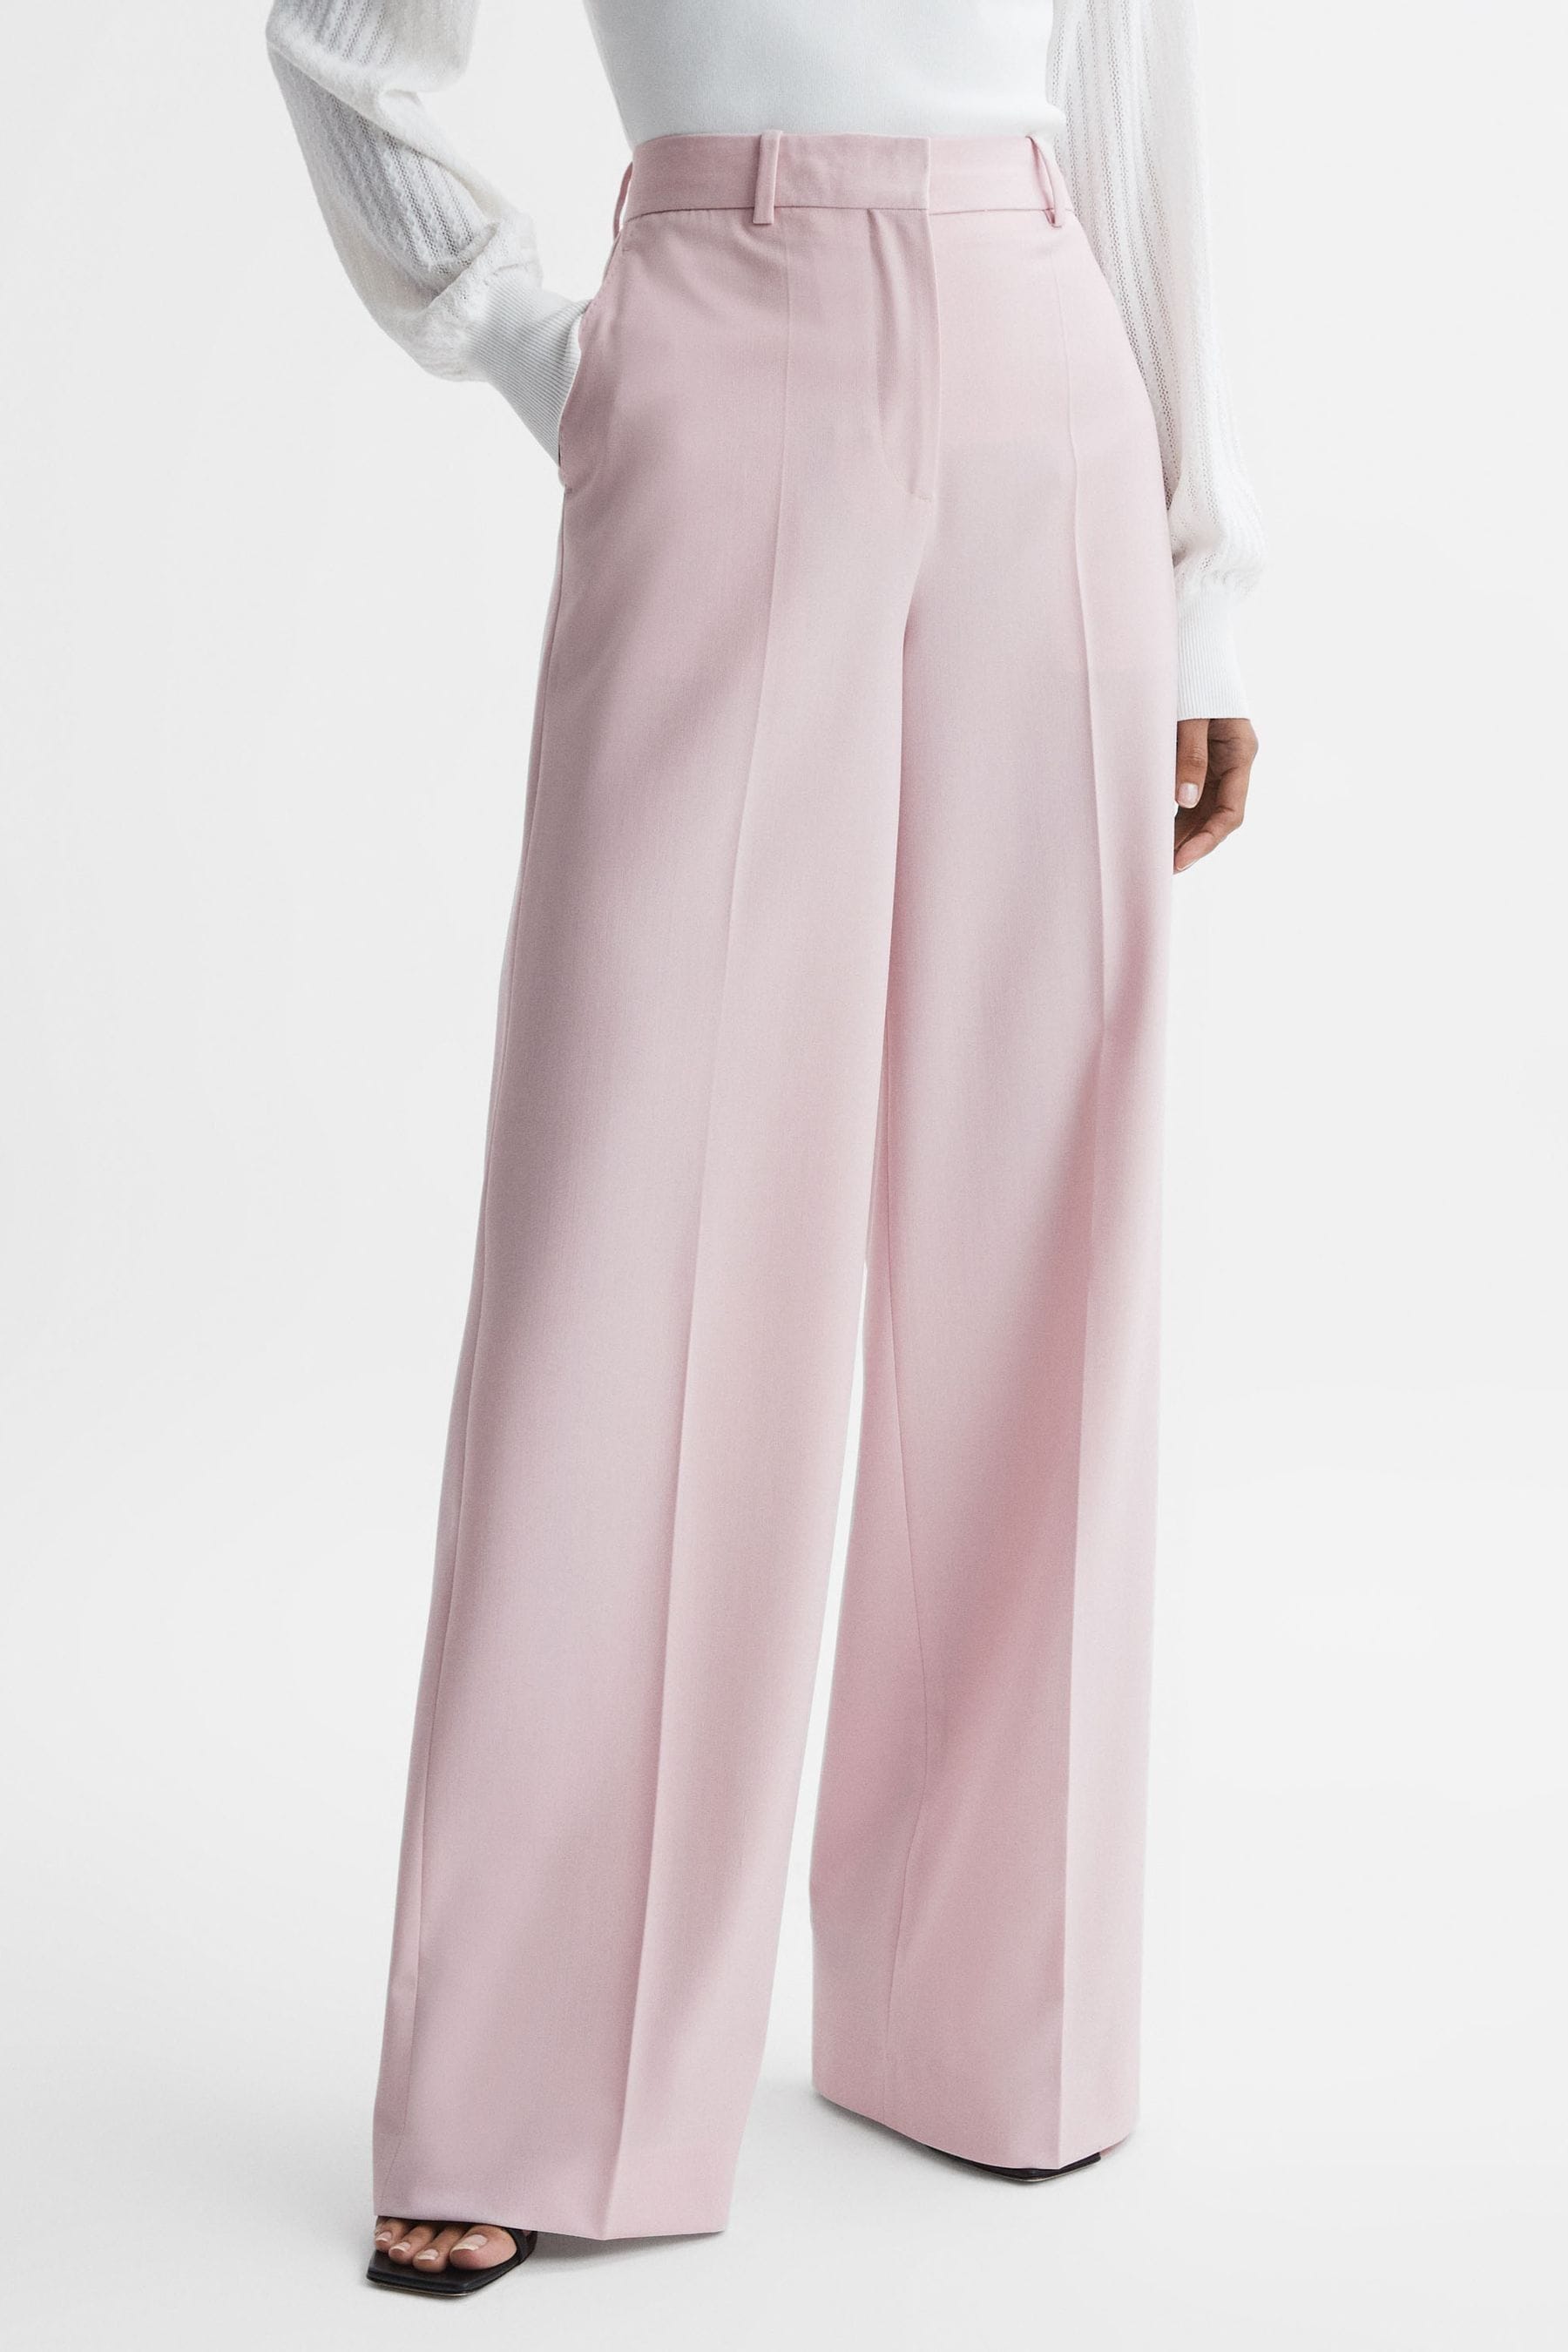 Reiss Evelyn - Pink Wool Blend Mid Rise Wide Leg Trousers, Us 6